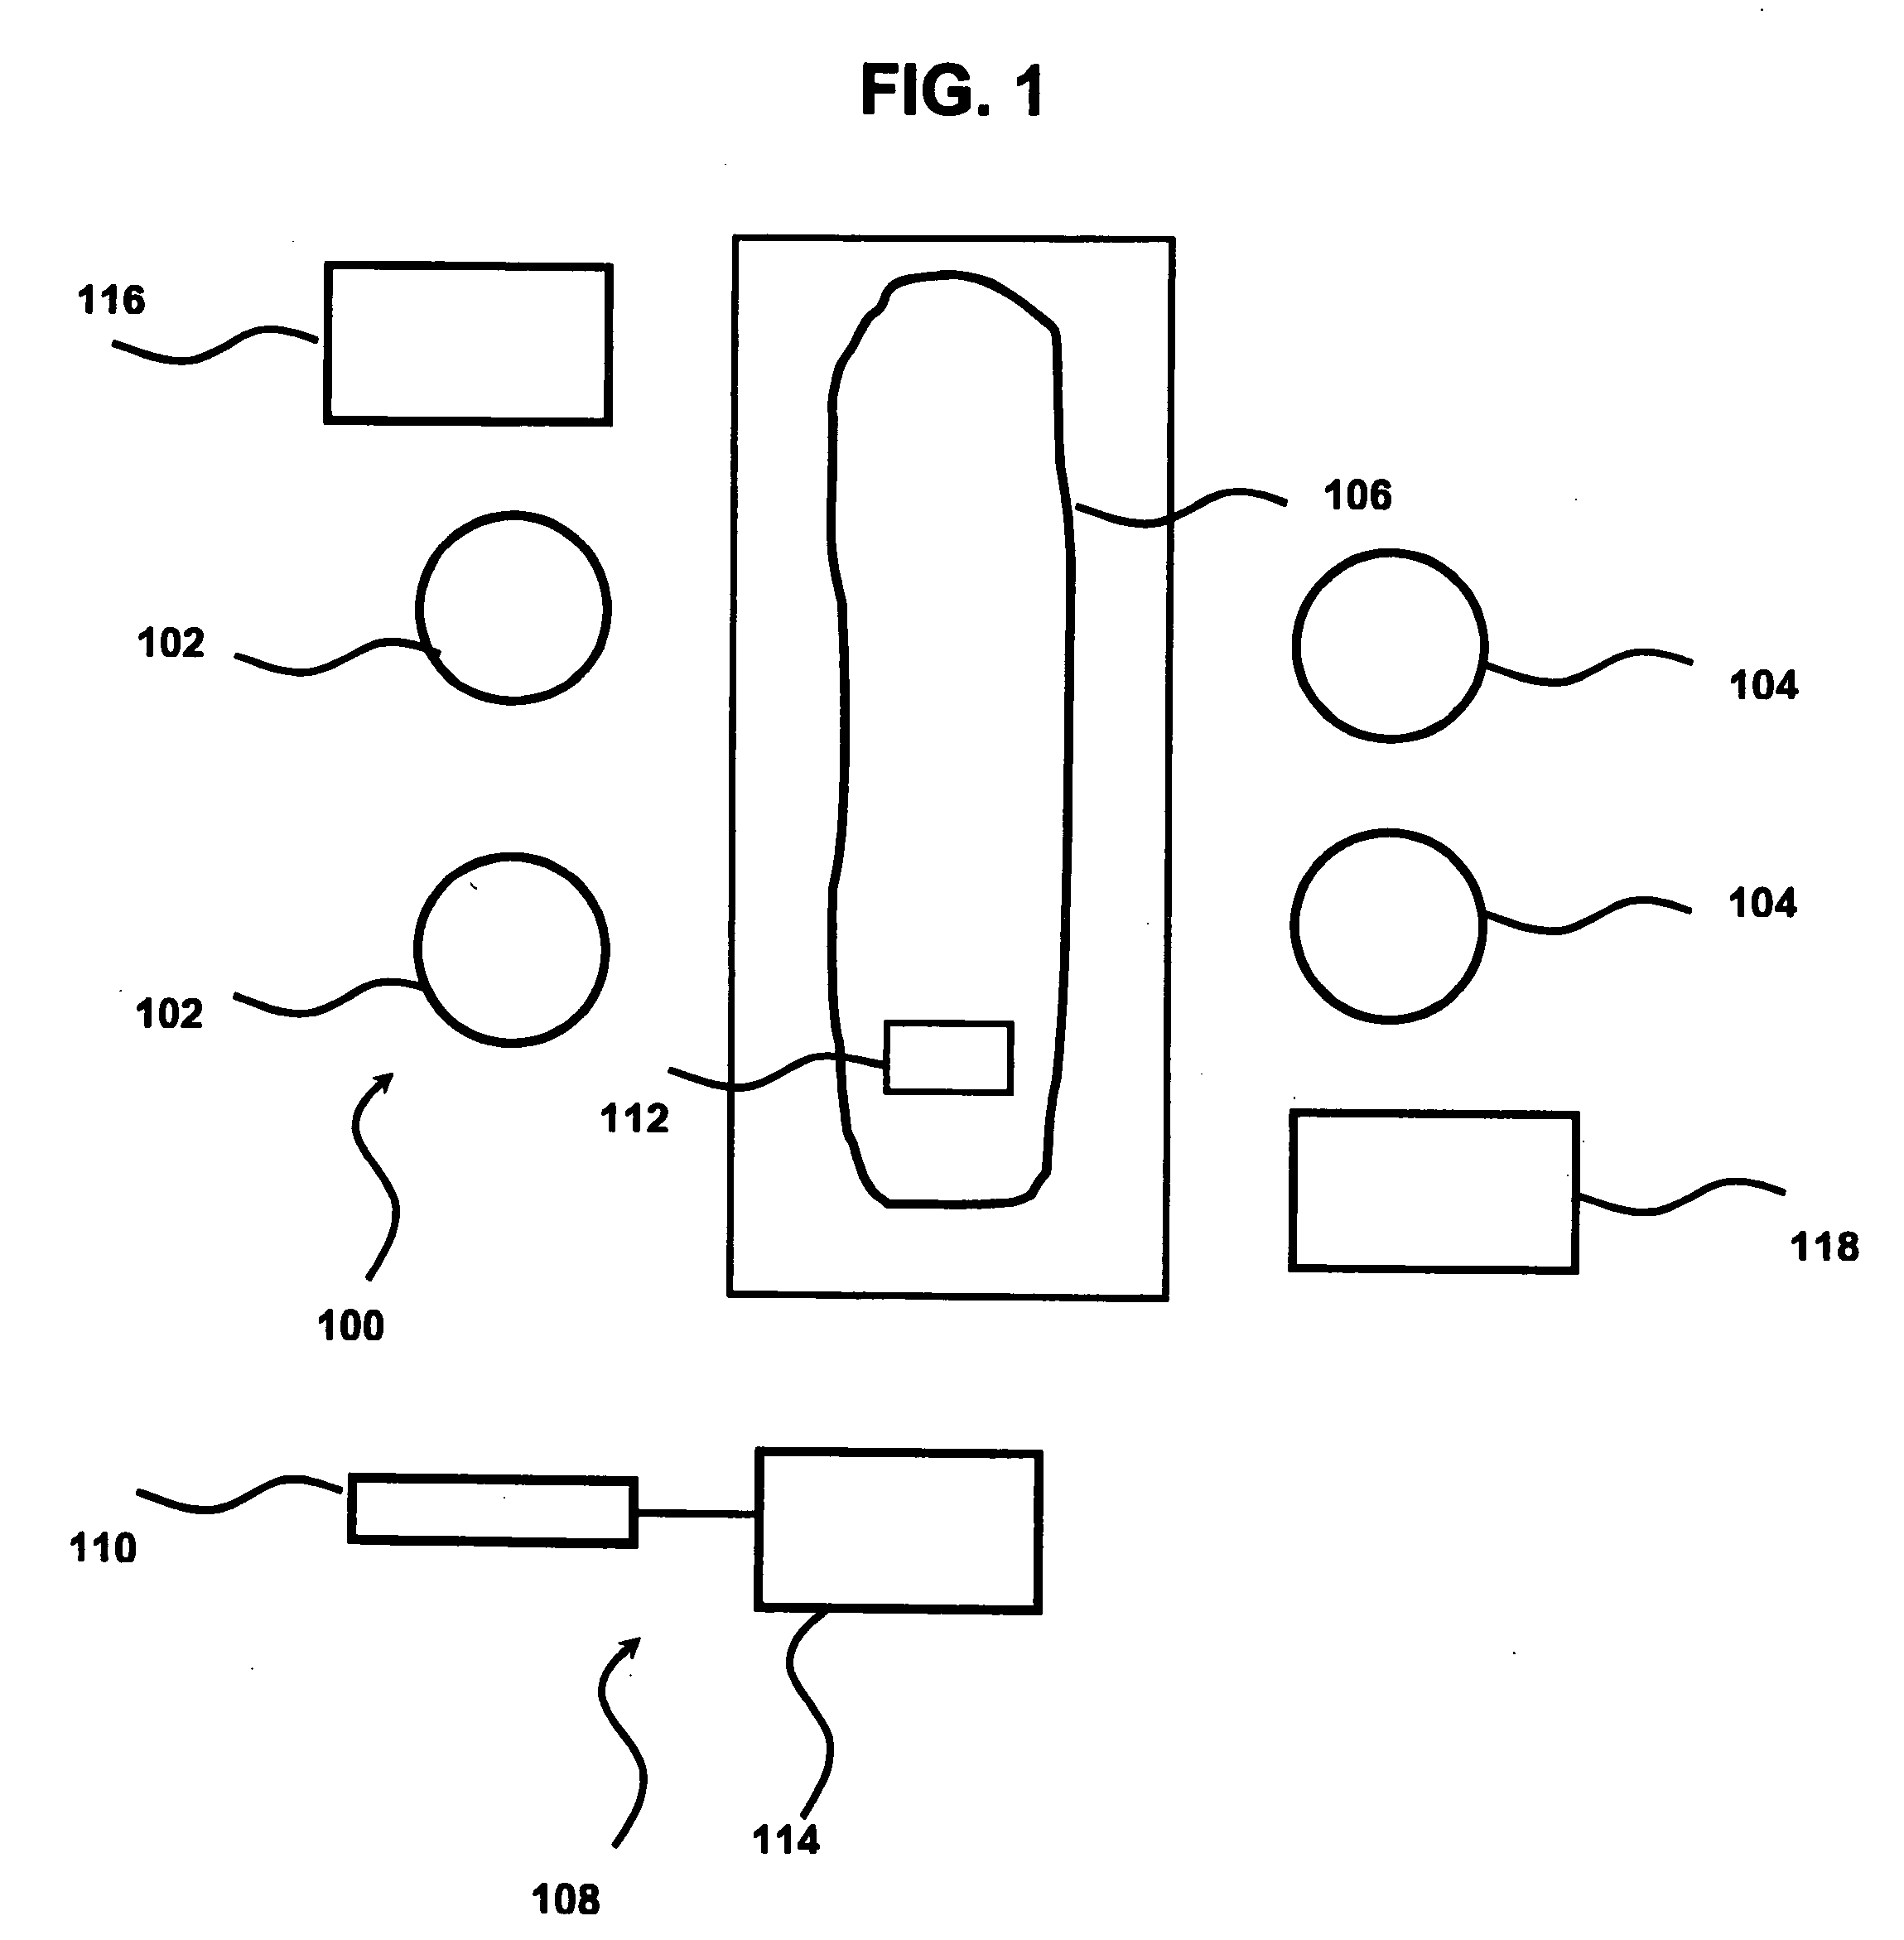 Display method and system for surgical procedures